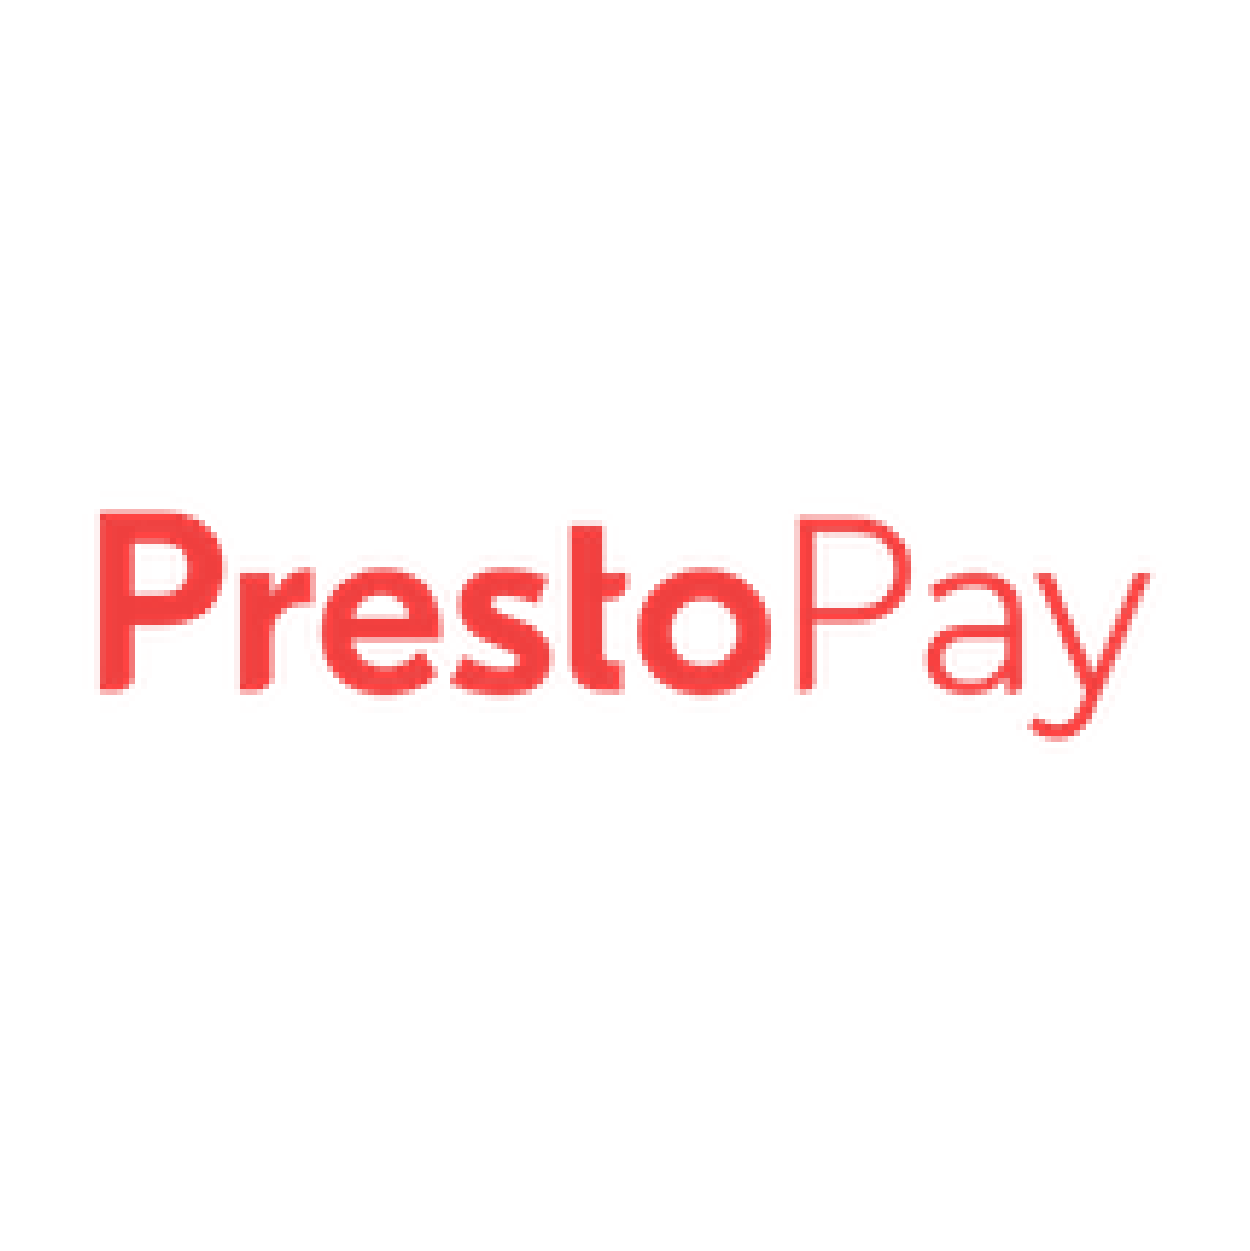  Fast and easy mobile payments with Presto Pay.